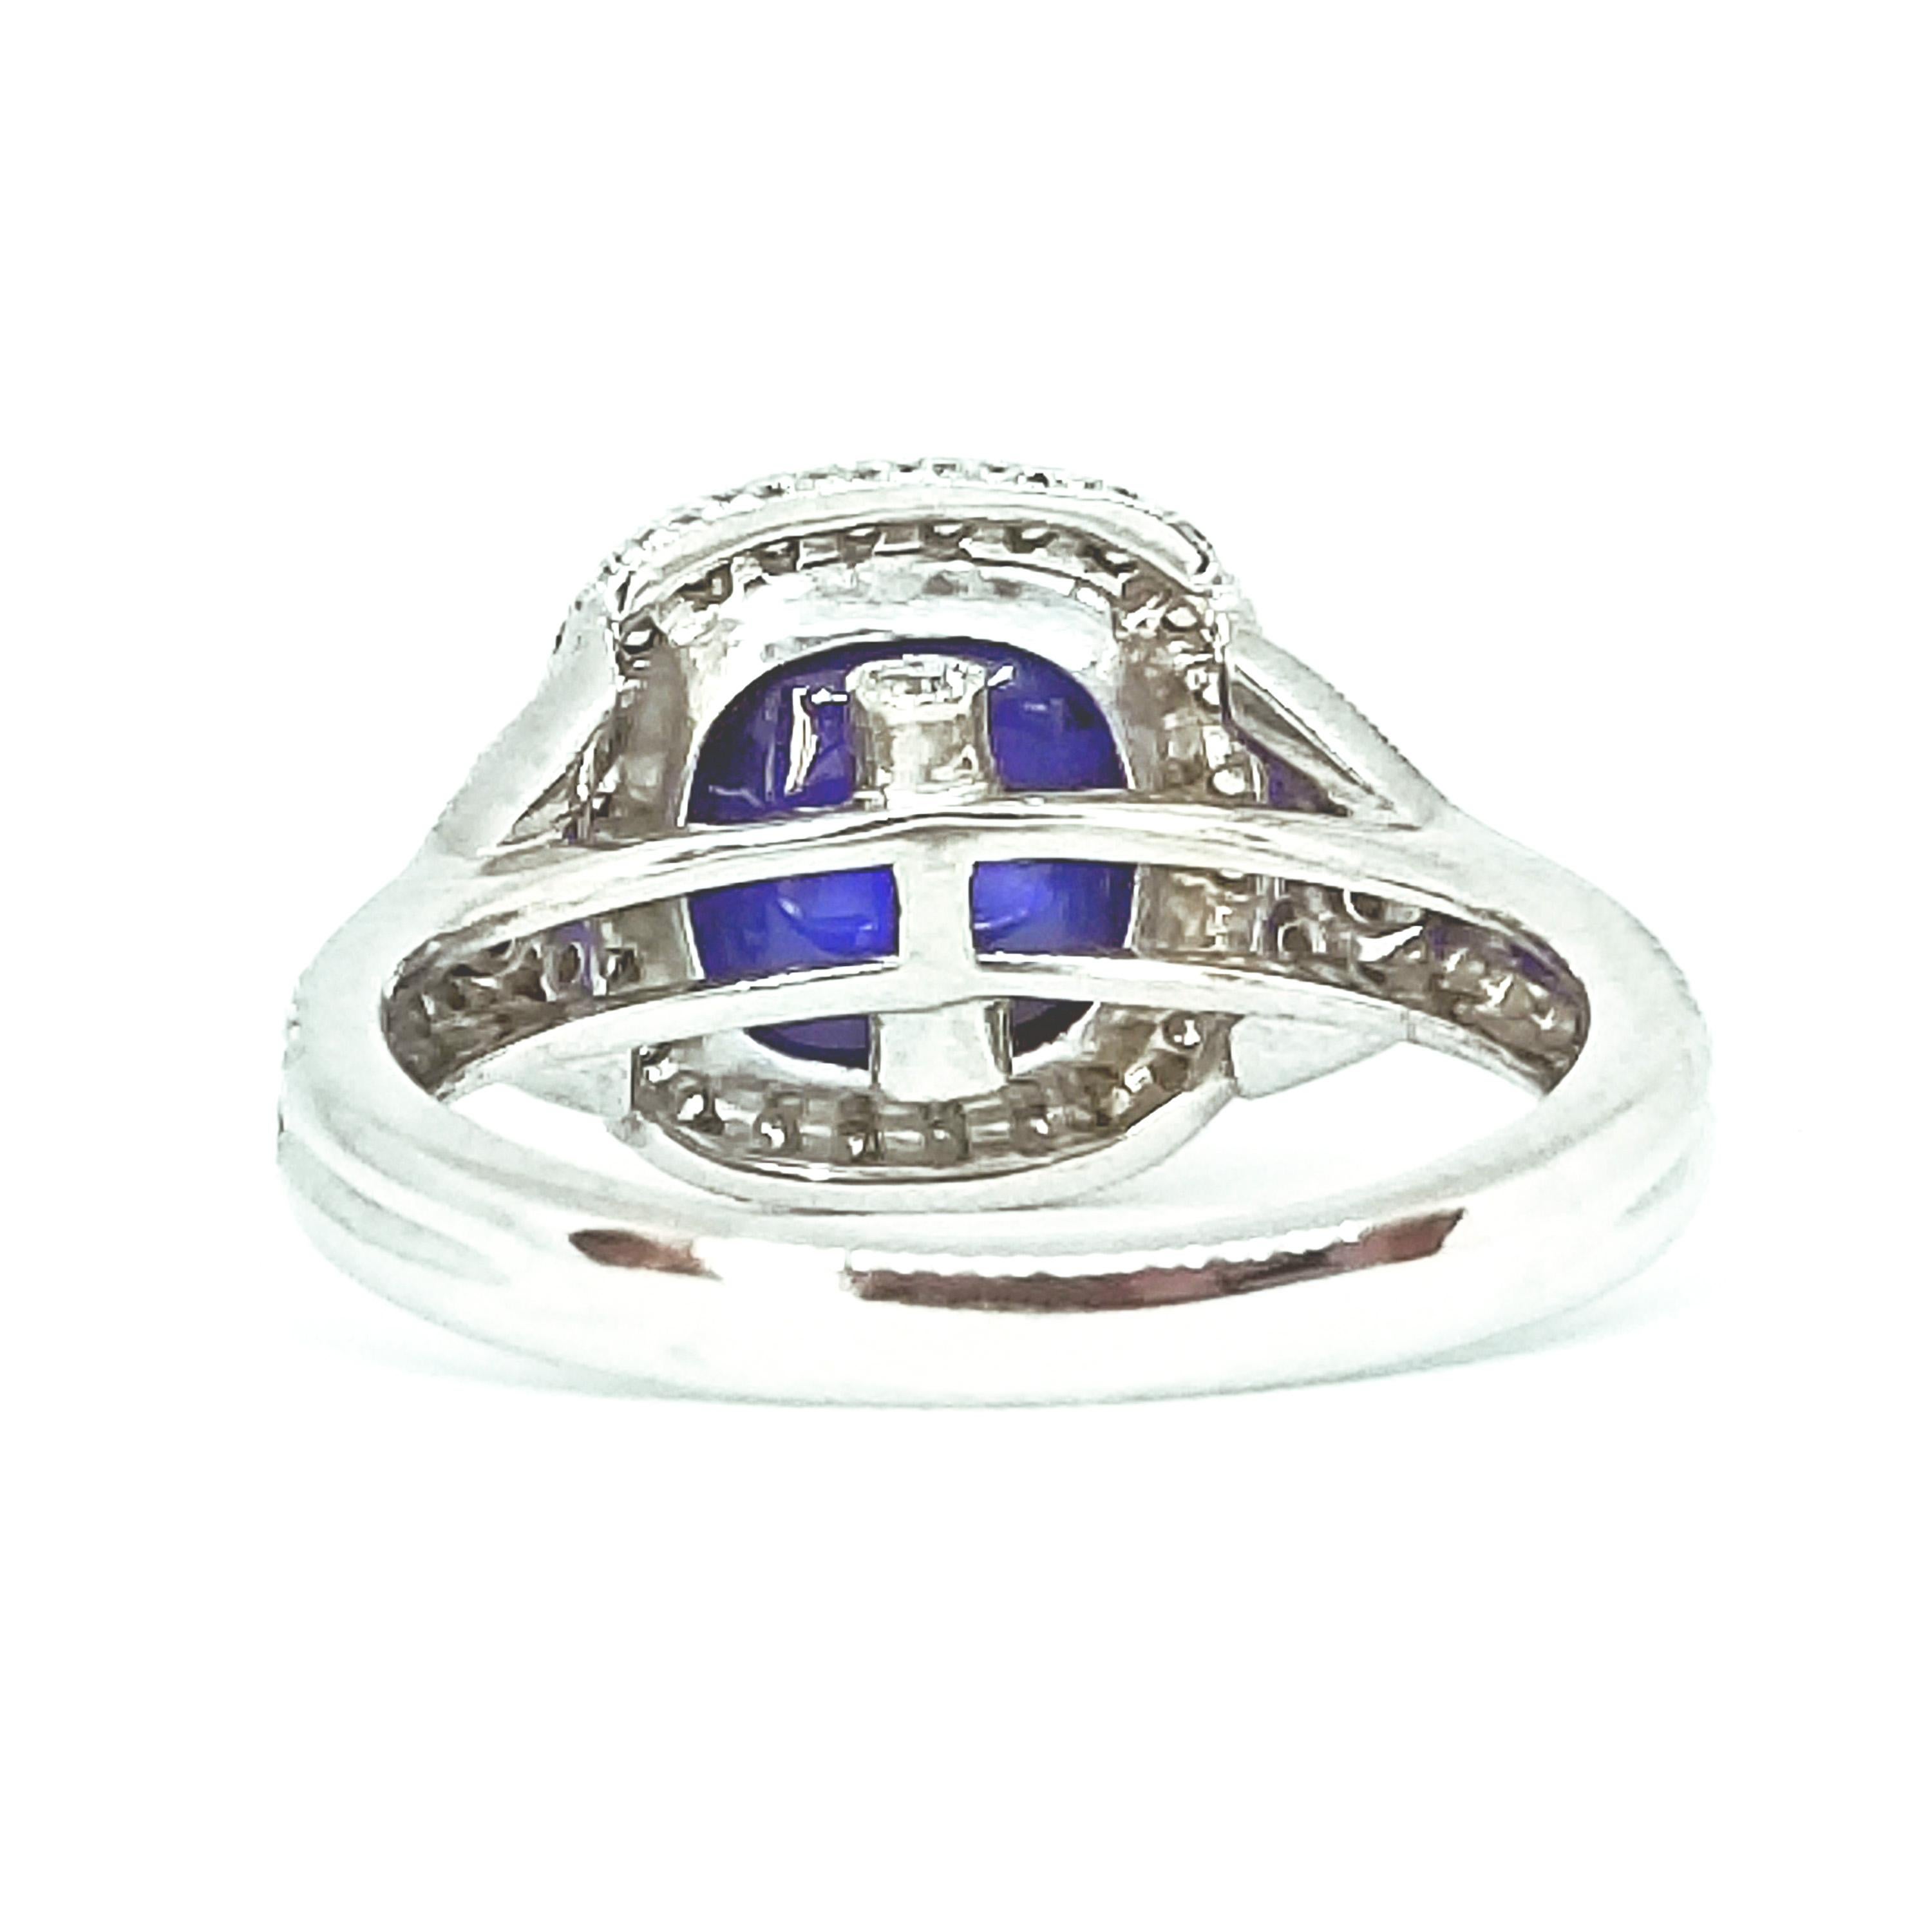 4.05 Carat Blue Sugarloaf Cushion Sapphire Diamond Deco Style Ring White Gold For Sale 1